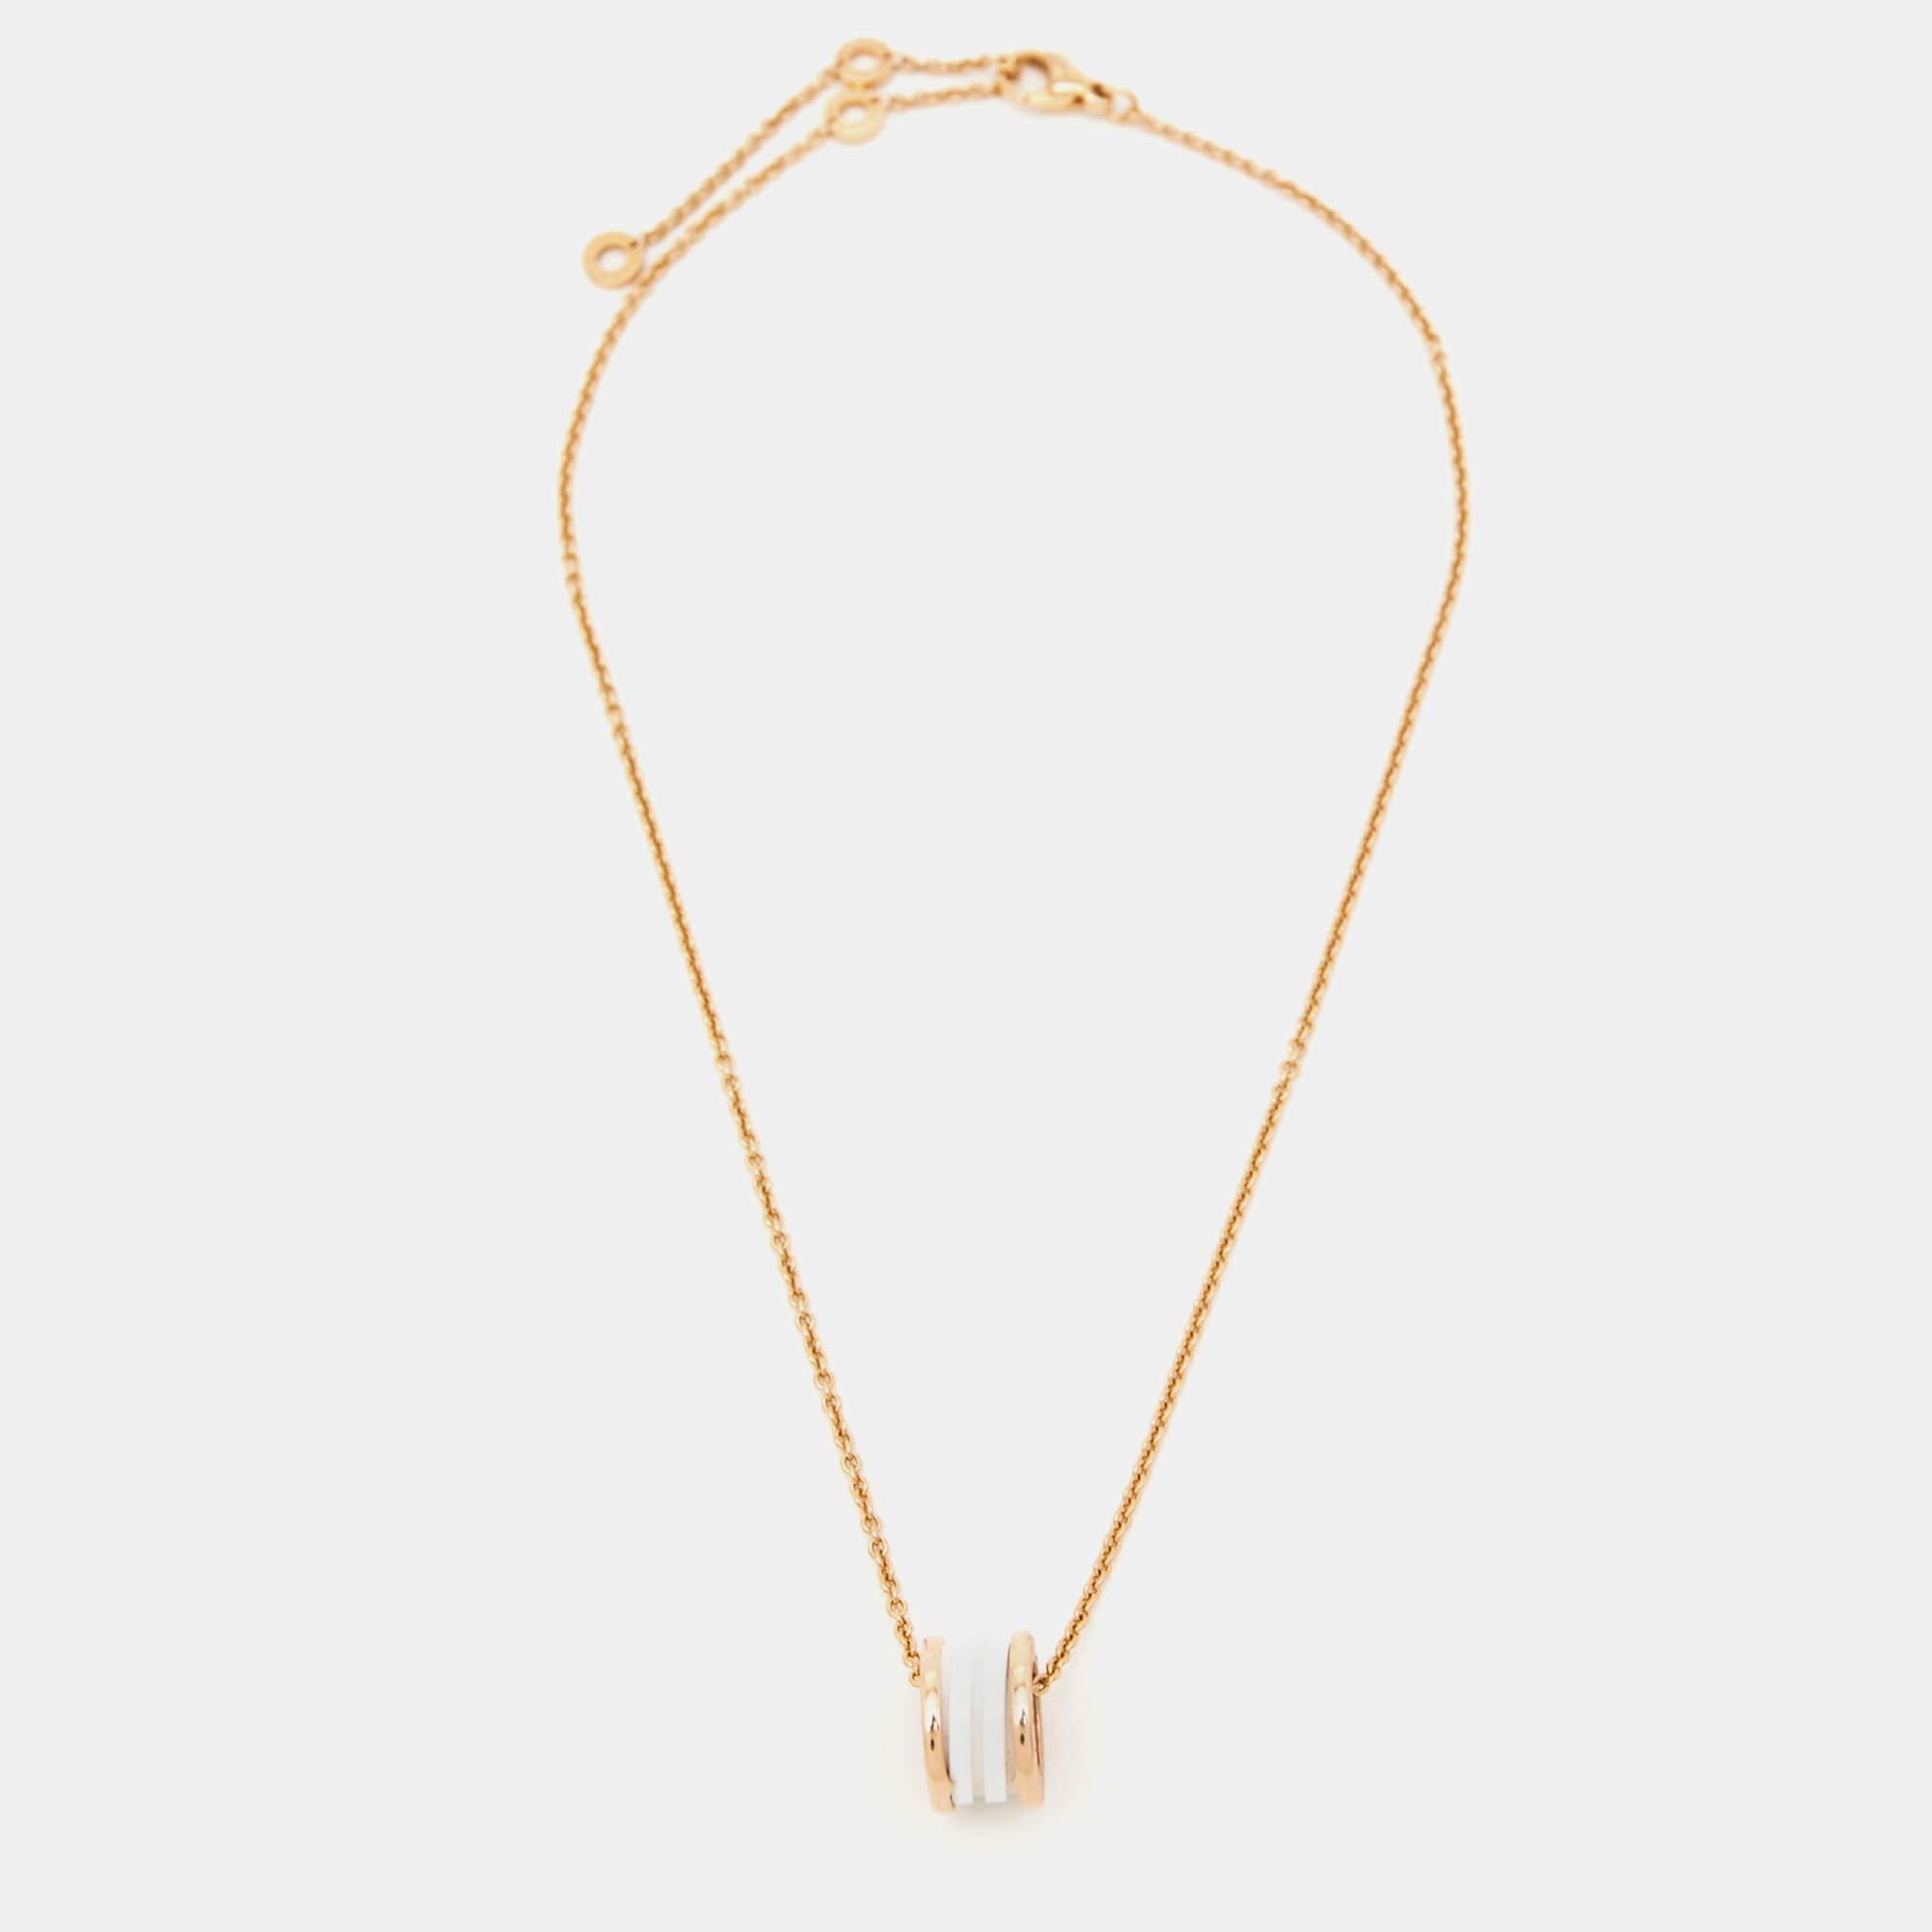 The Bvlgari B.Zero1 necklace effortlessly combines elegance and modernity. Crafted with precision, the pendant features the iconic spiral design in lustrous 18k rose gold, harmoniously complemented by sleek ceramic accents. A symbol of style and